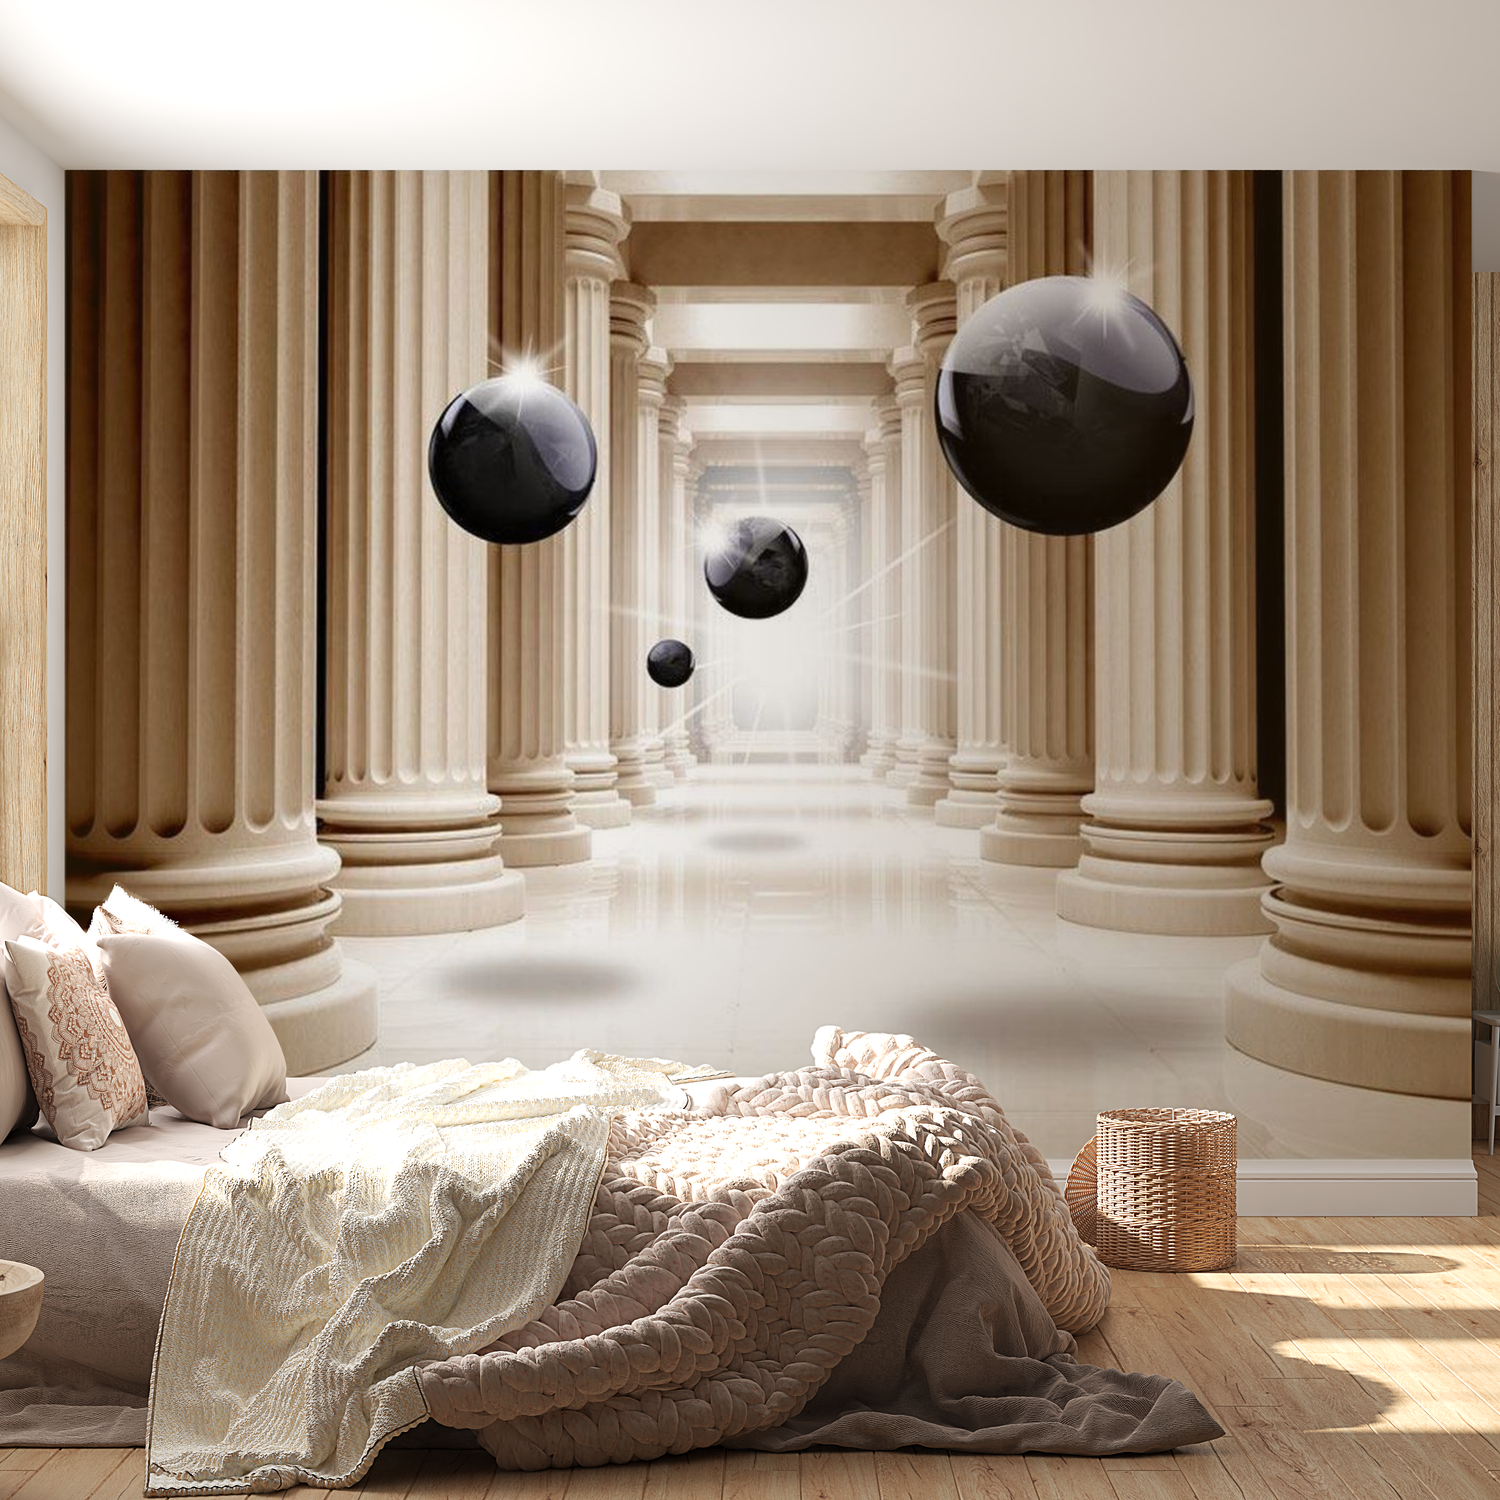 3D Illusion Wallpaper Wall Mural - Columns Of Justice 39"Wx27"H